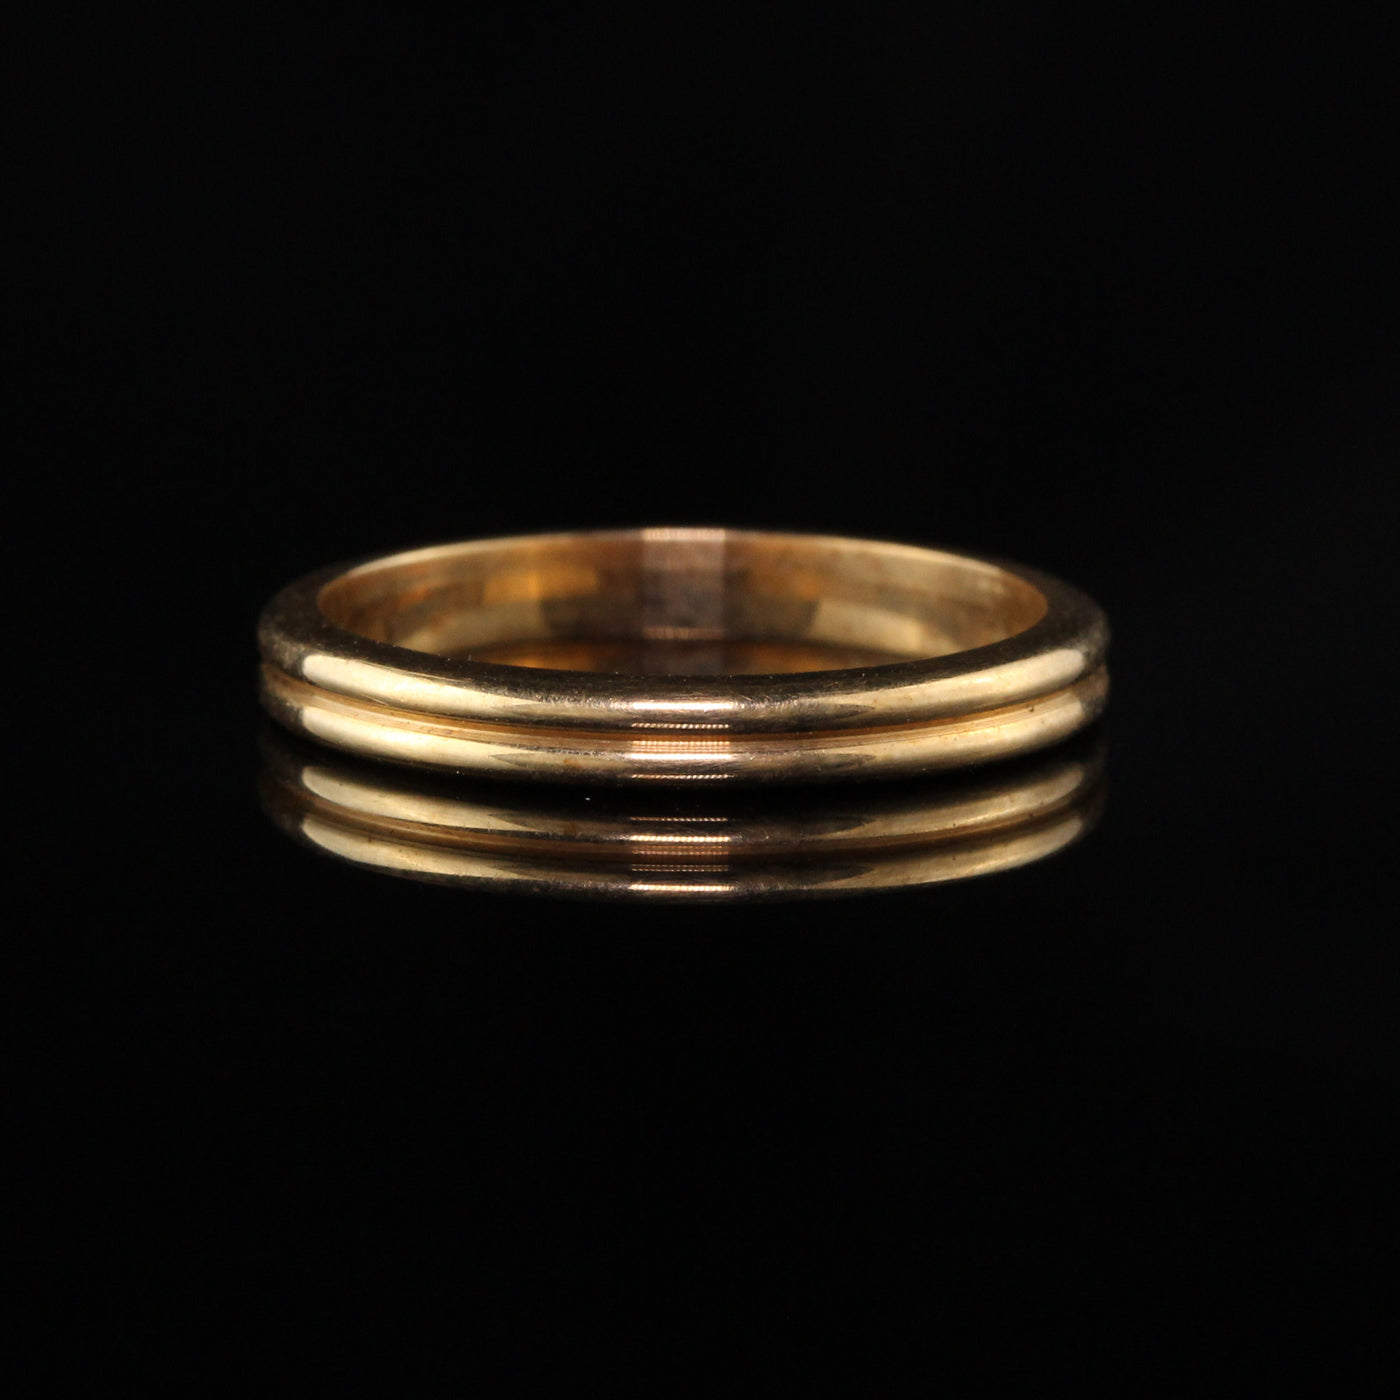 Antique Art Deco 14K Yellow Gold Engraved Wedding Band - Size 6 1/4